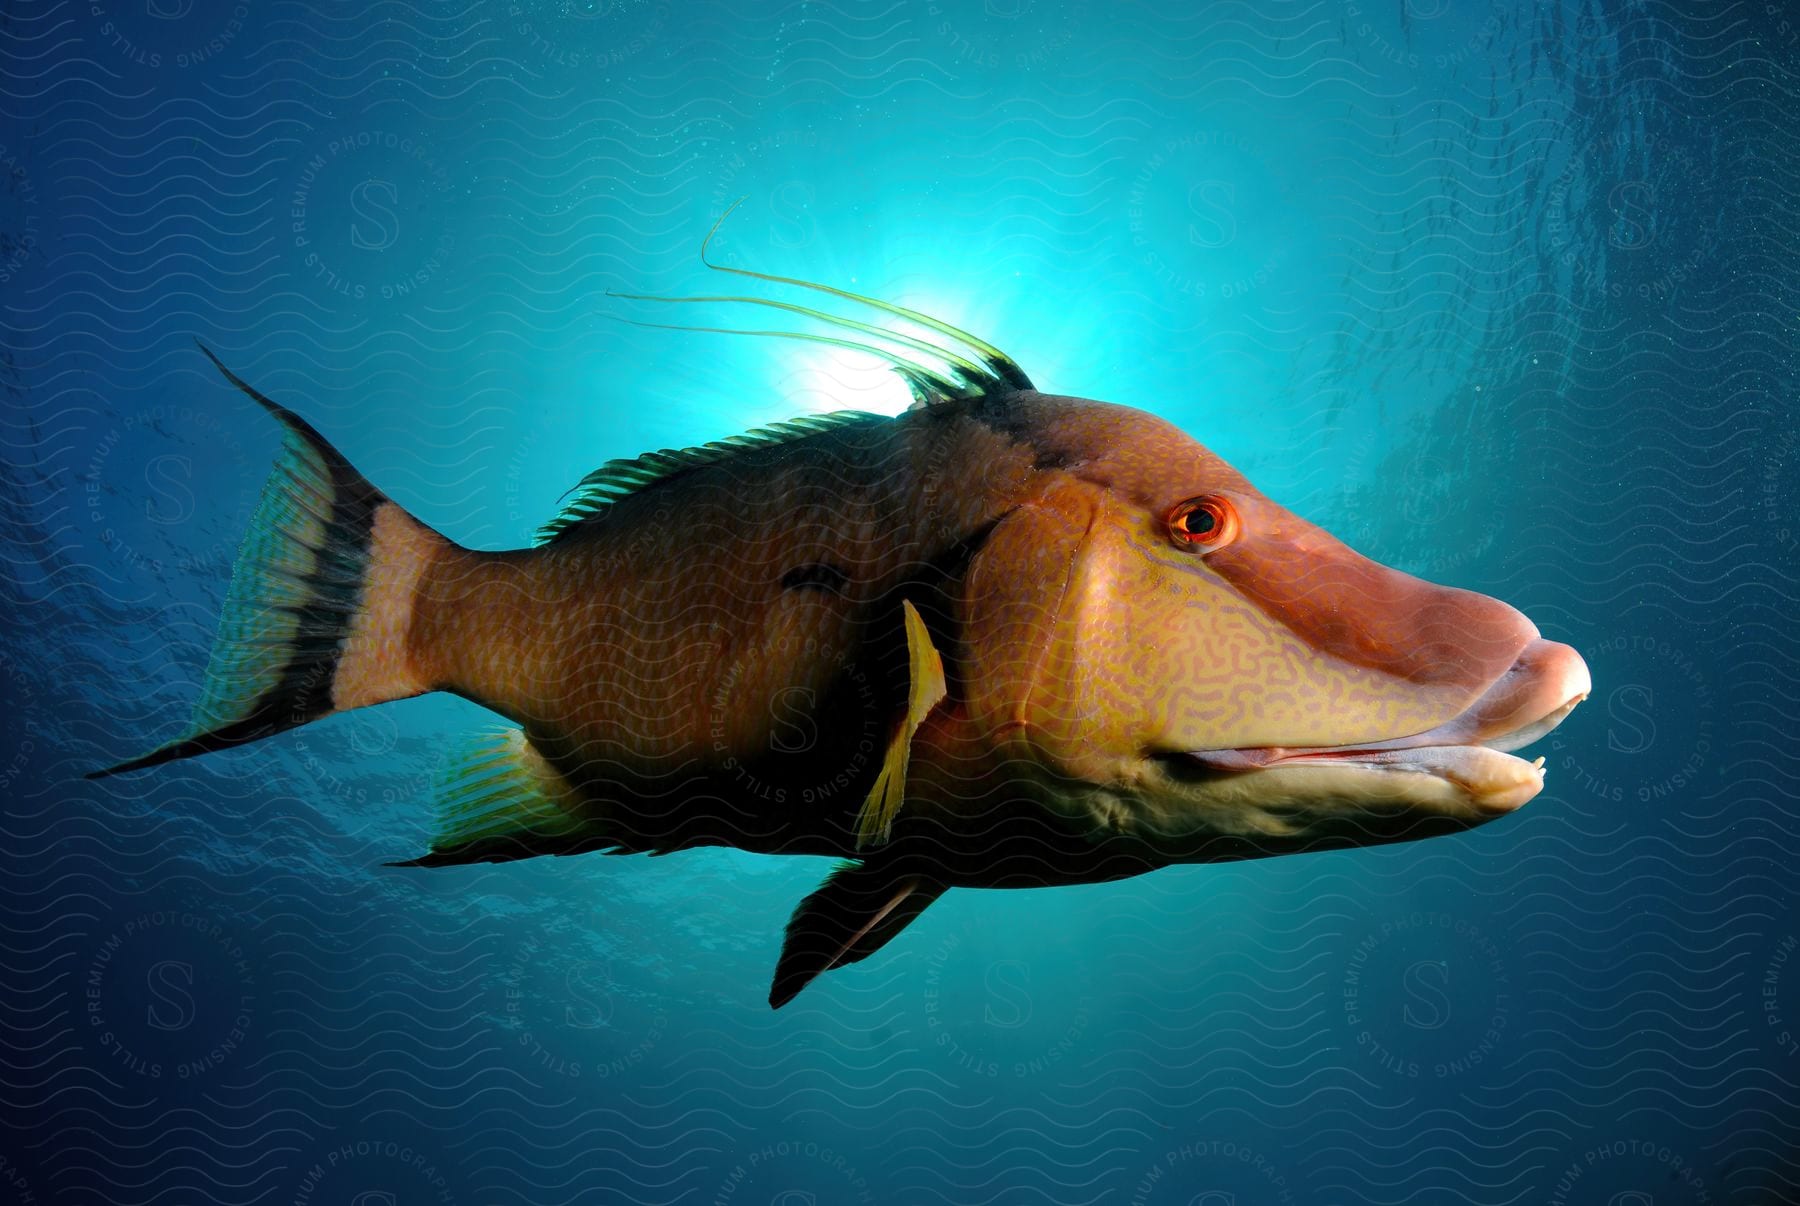 A hogfish swimming in the water